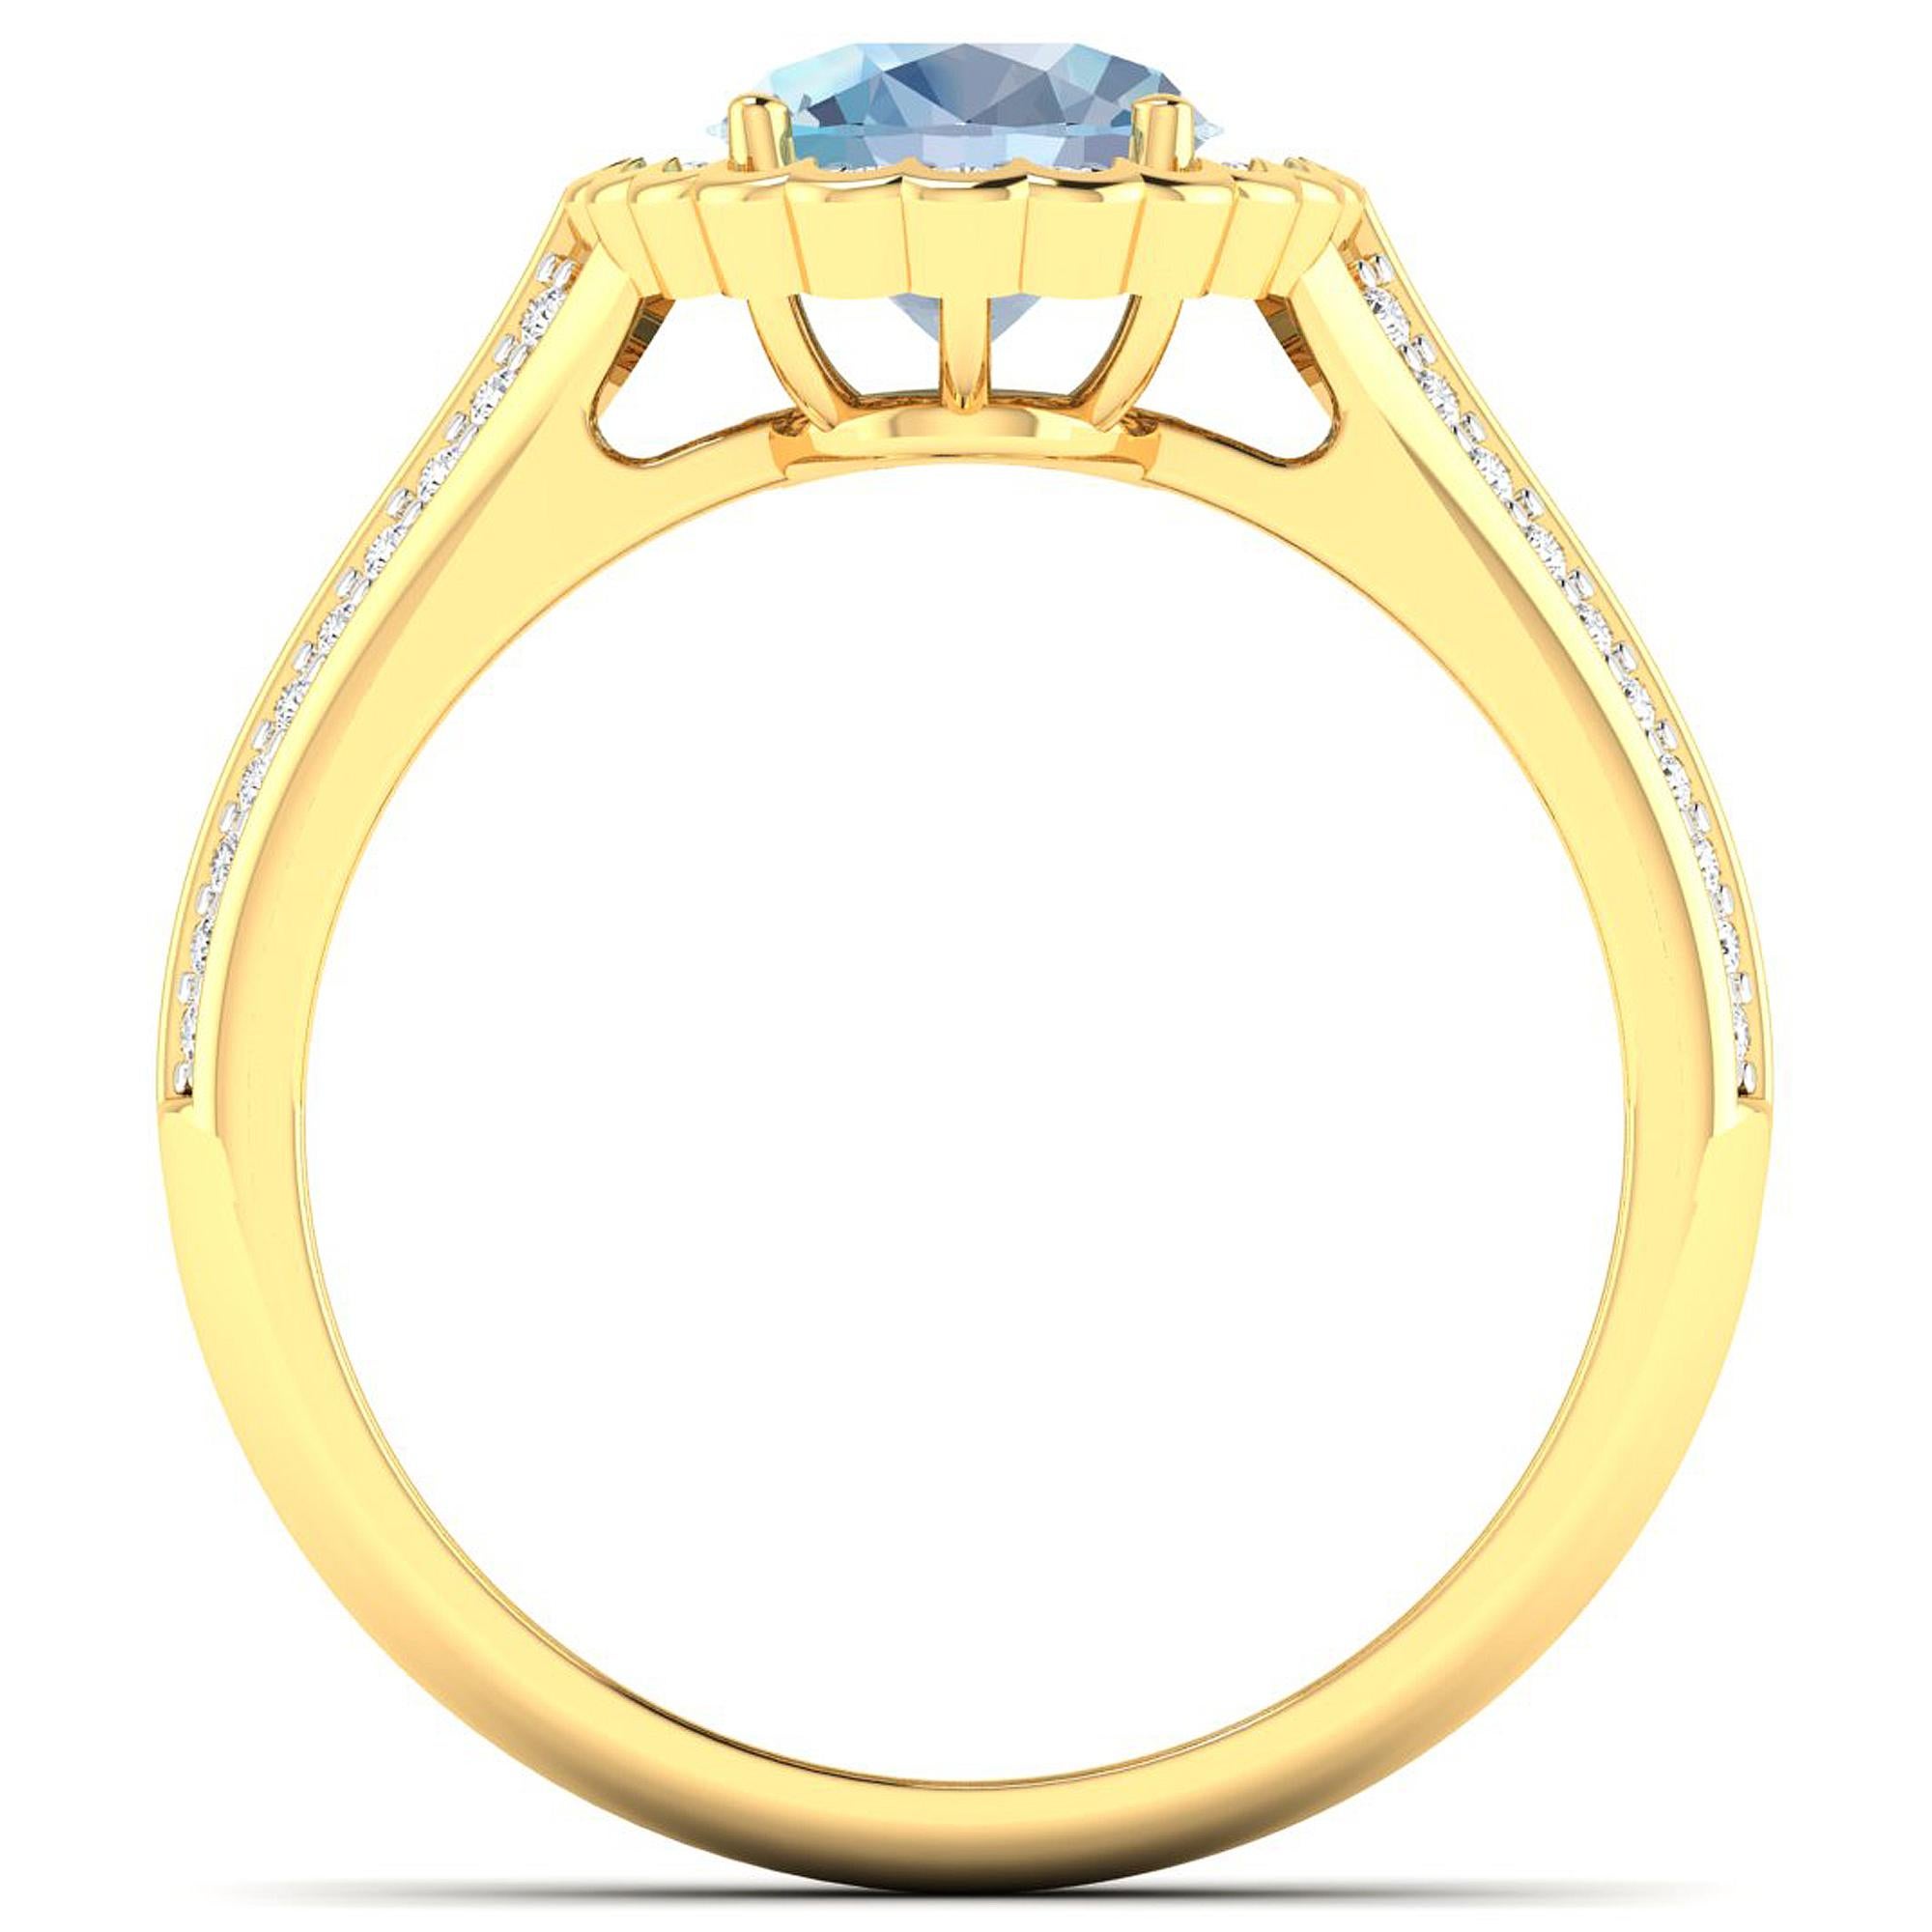 Aquamarine Gold Ring, 14Kt Gold Aquamarine & Diamond Engagement Ring, 1.82ctw.

Flaunt yourself with this 14K Yellow Gold Aquamarine & White Diamond Engagement Ring. The setting is inlaid with 62 accented full-cut White Diamond round stones for a